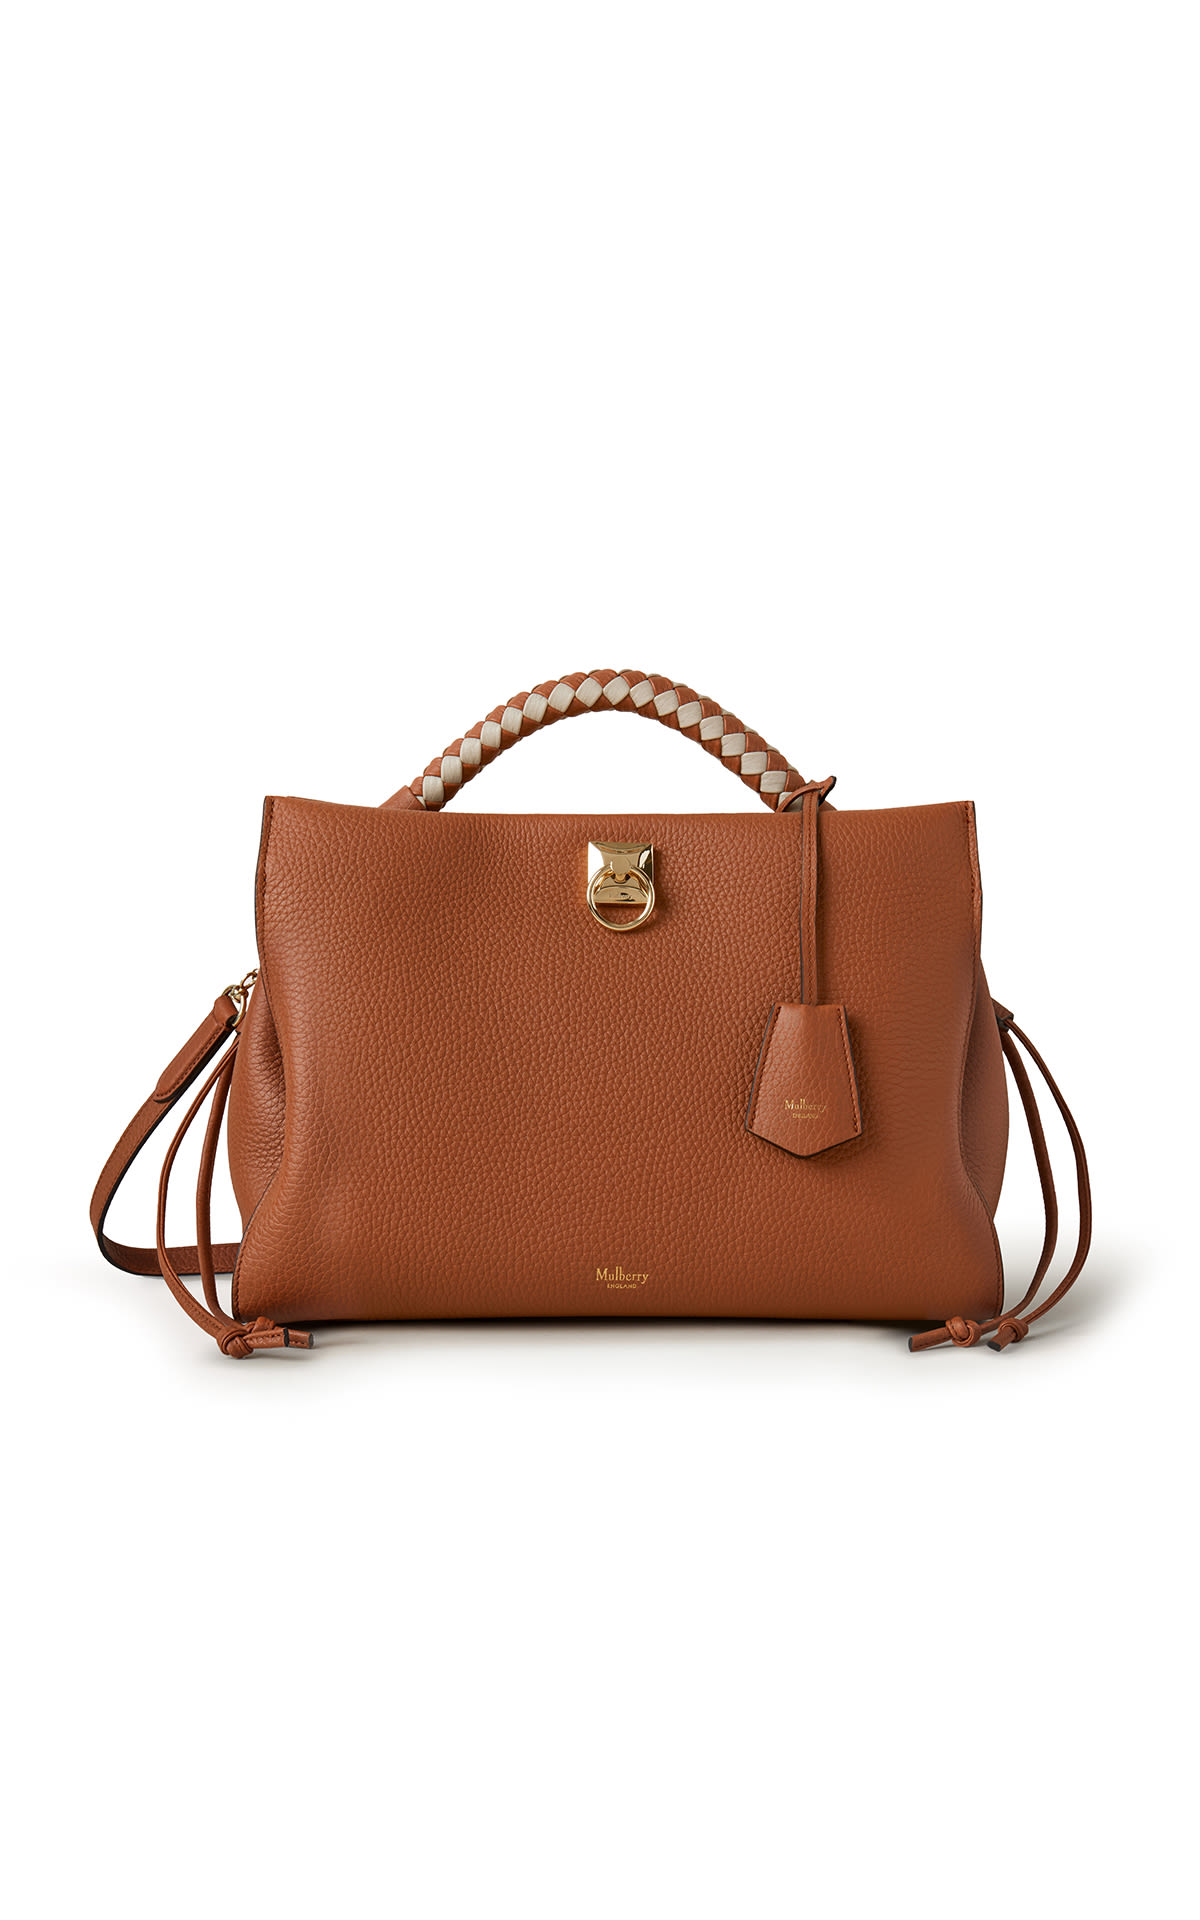 Mulberry Iris in heavy grain and silky calf chestnut from Bicester Village